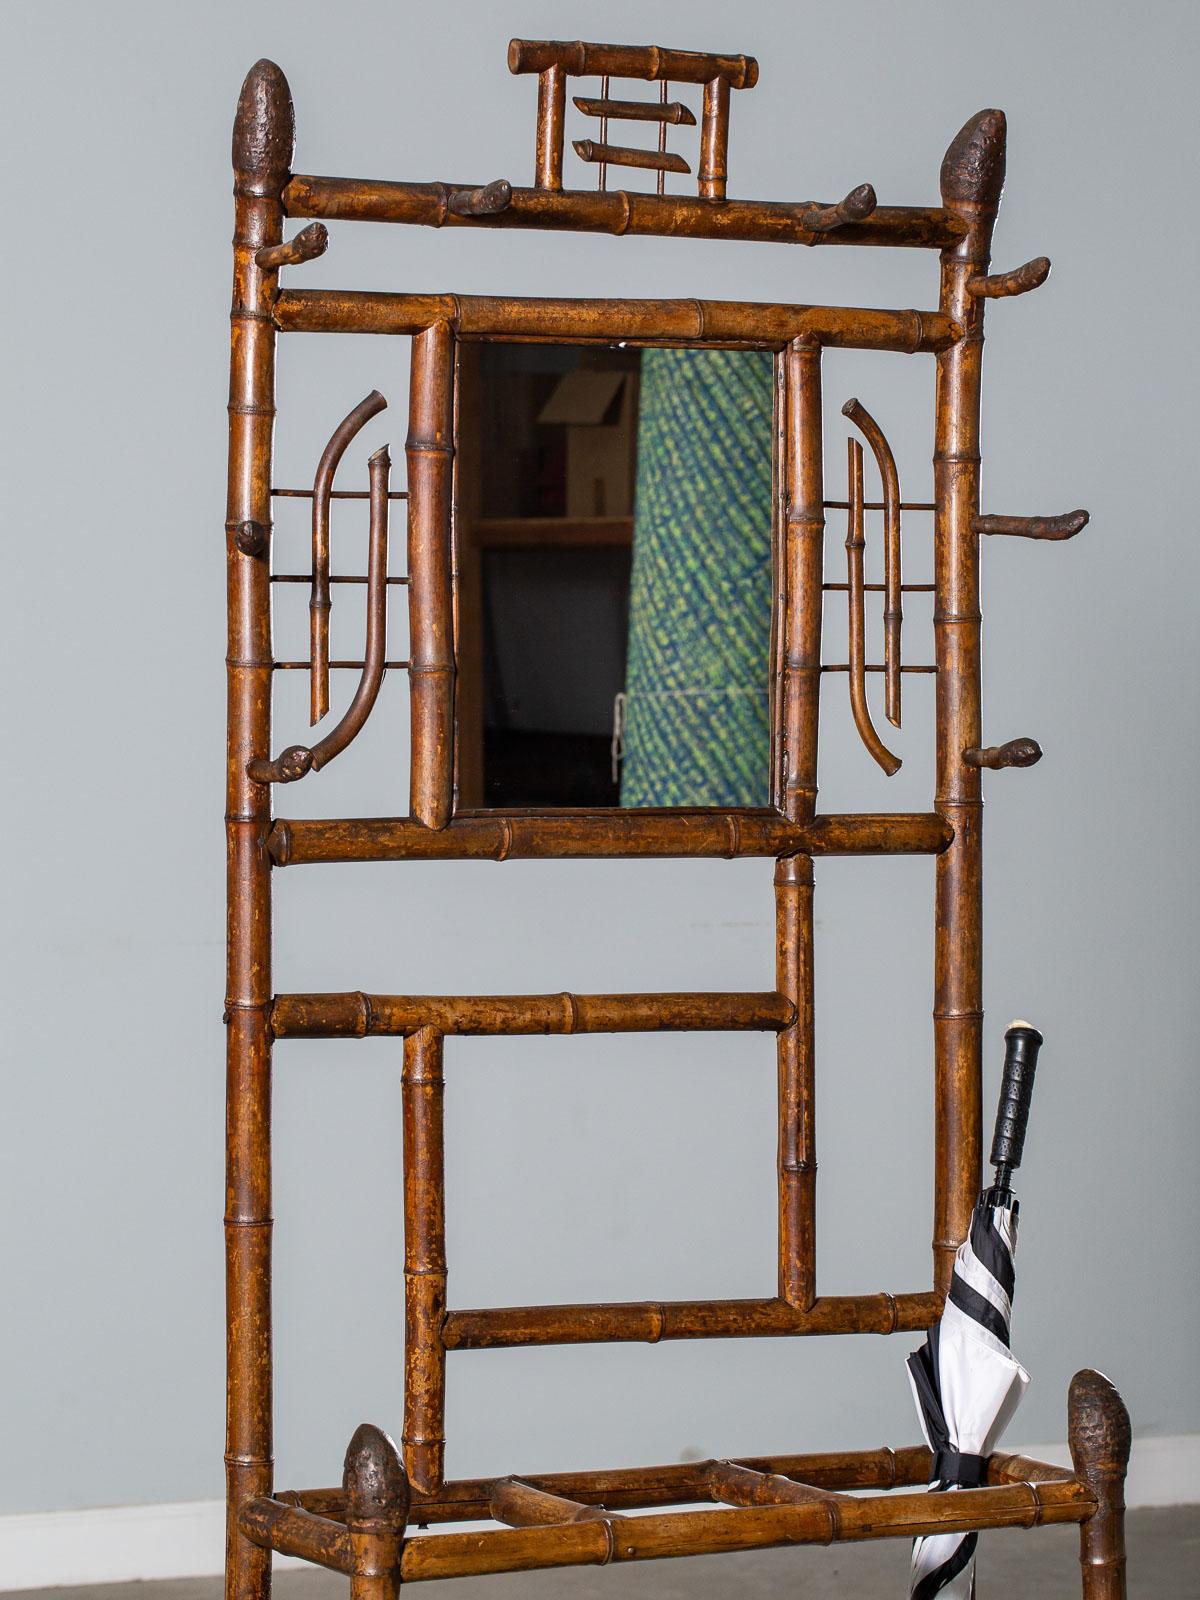 Hand-Crafted Antique English Scorched Bamboo Hall Stand Mirror, circa 1880 For Sale